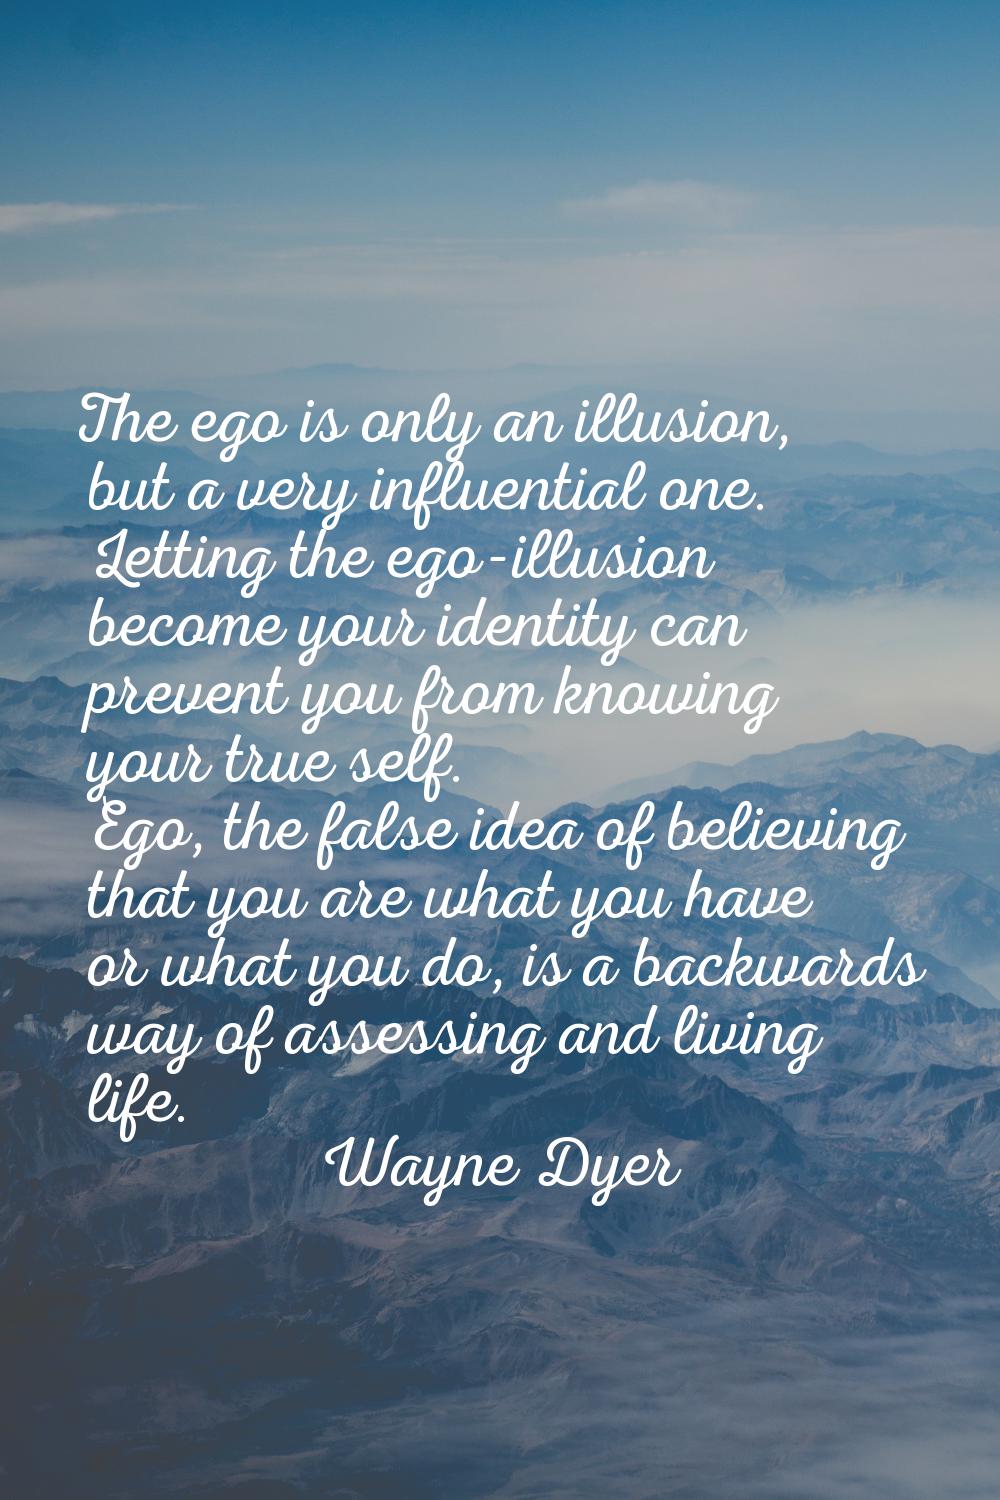 The ego is only an illusion, but a very influential one. Letting the ego-illusion become your ident